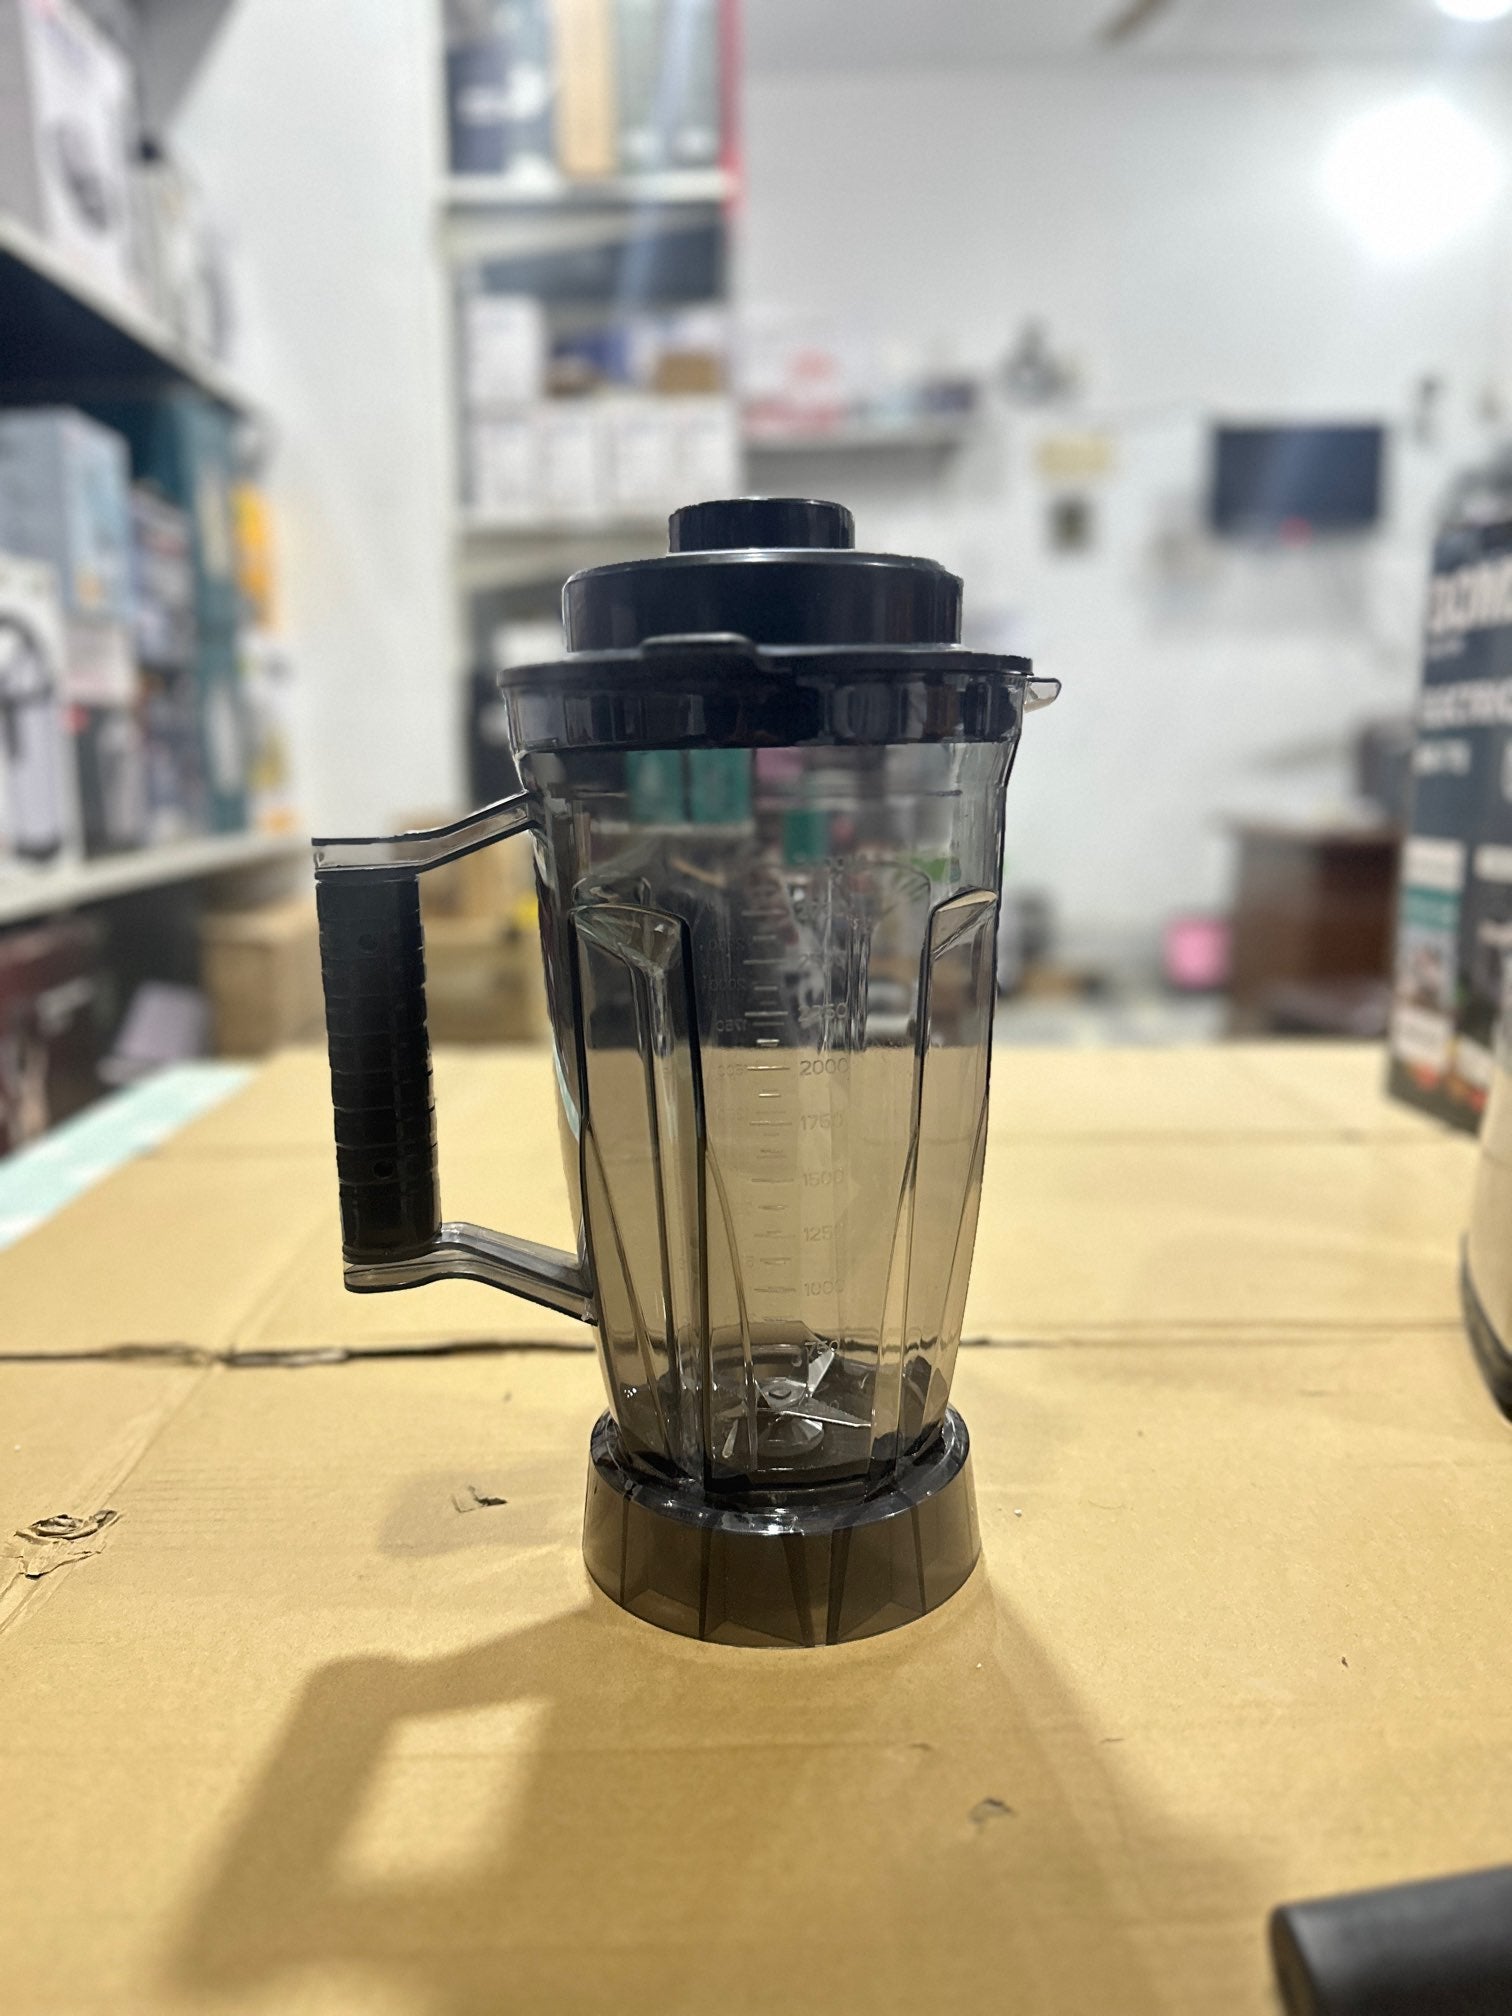 Germany lot imported Boma 3 in 1 electric blender